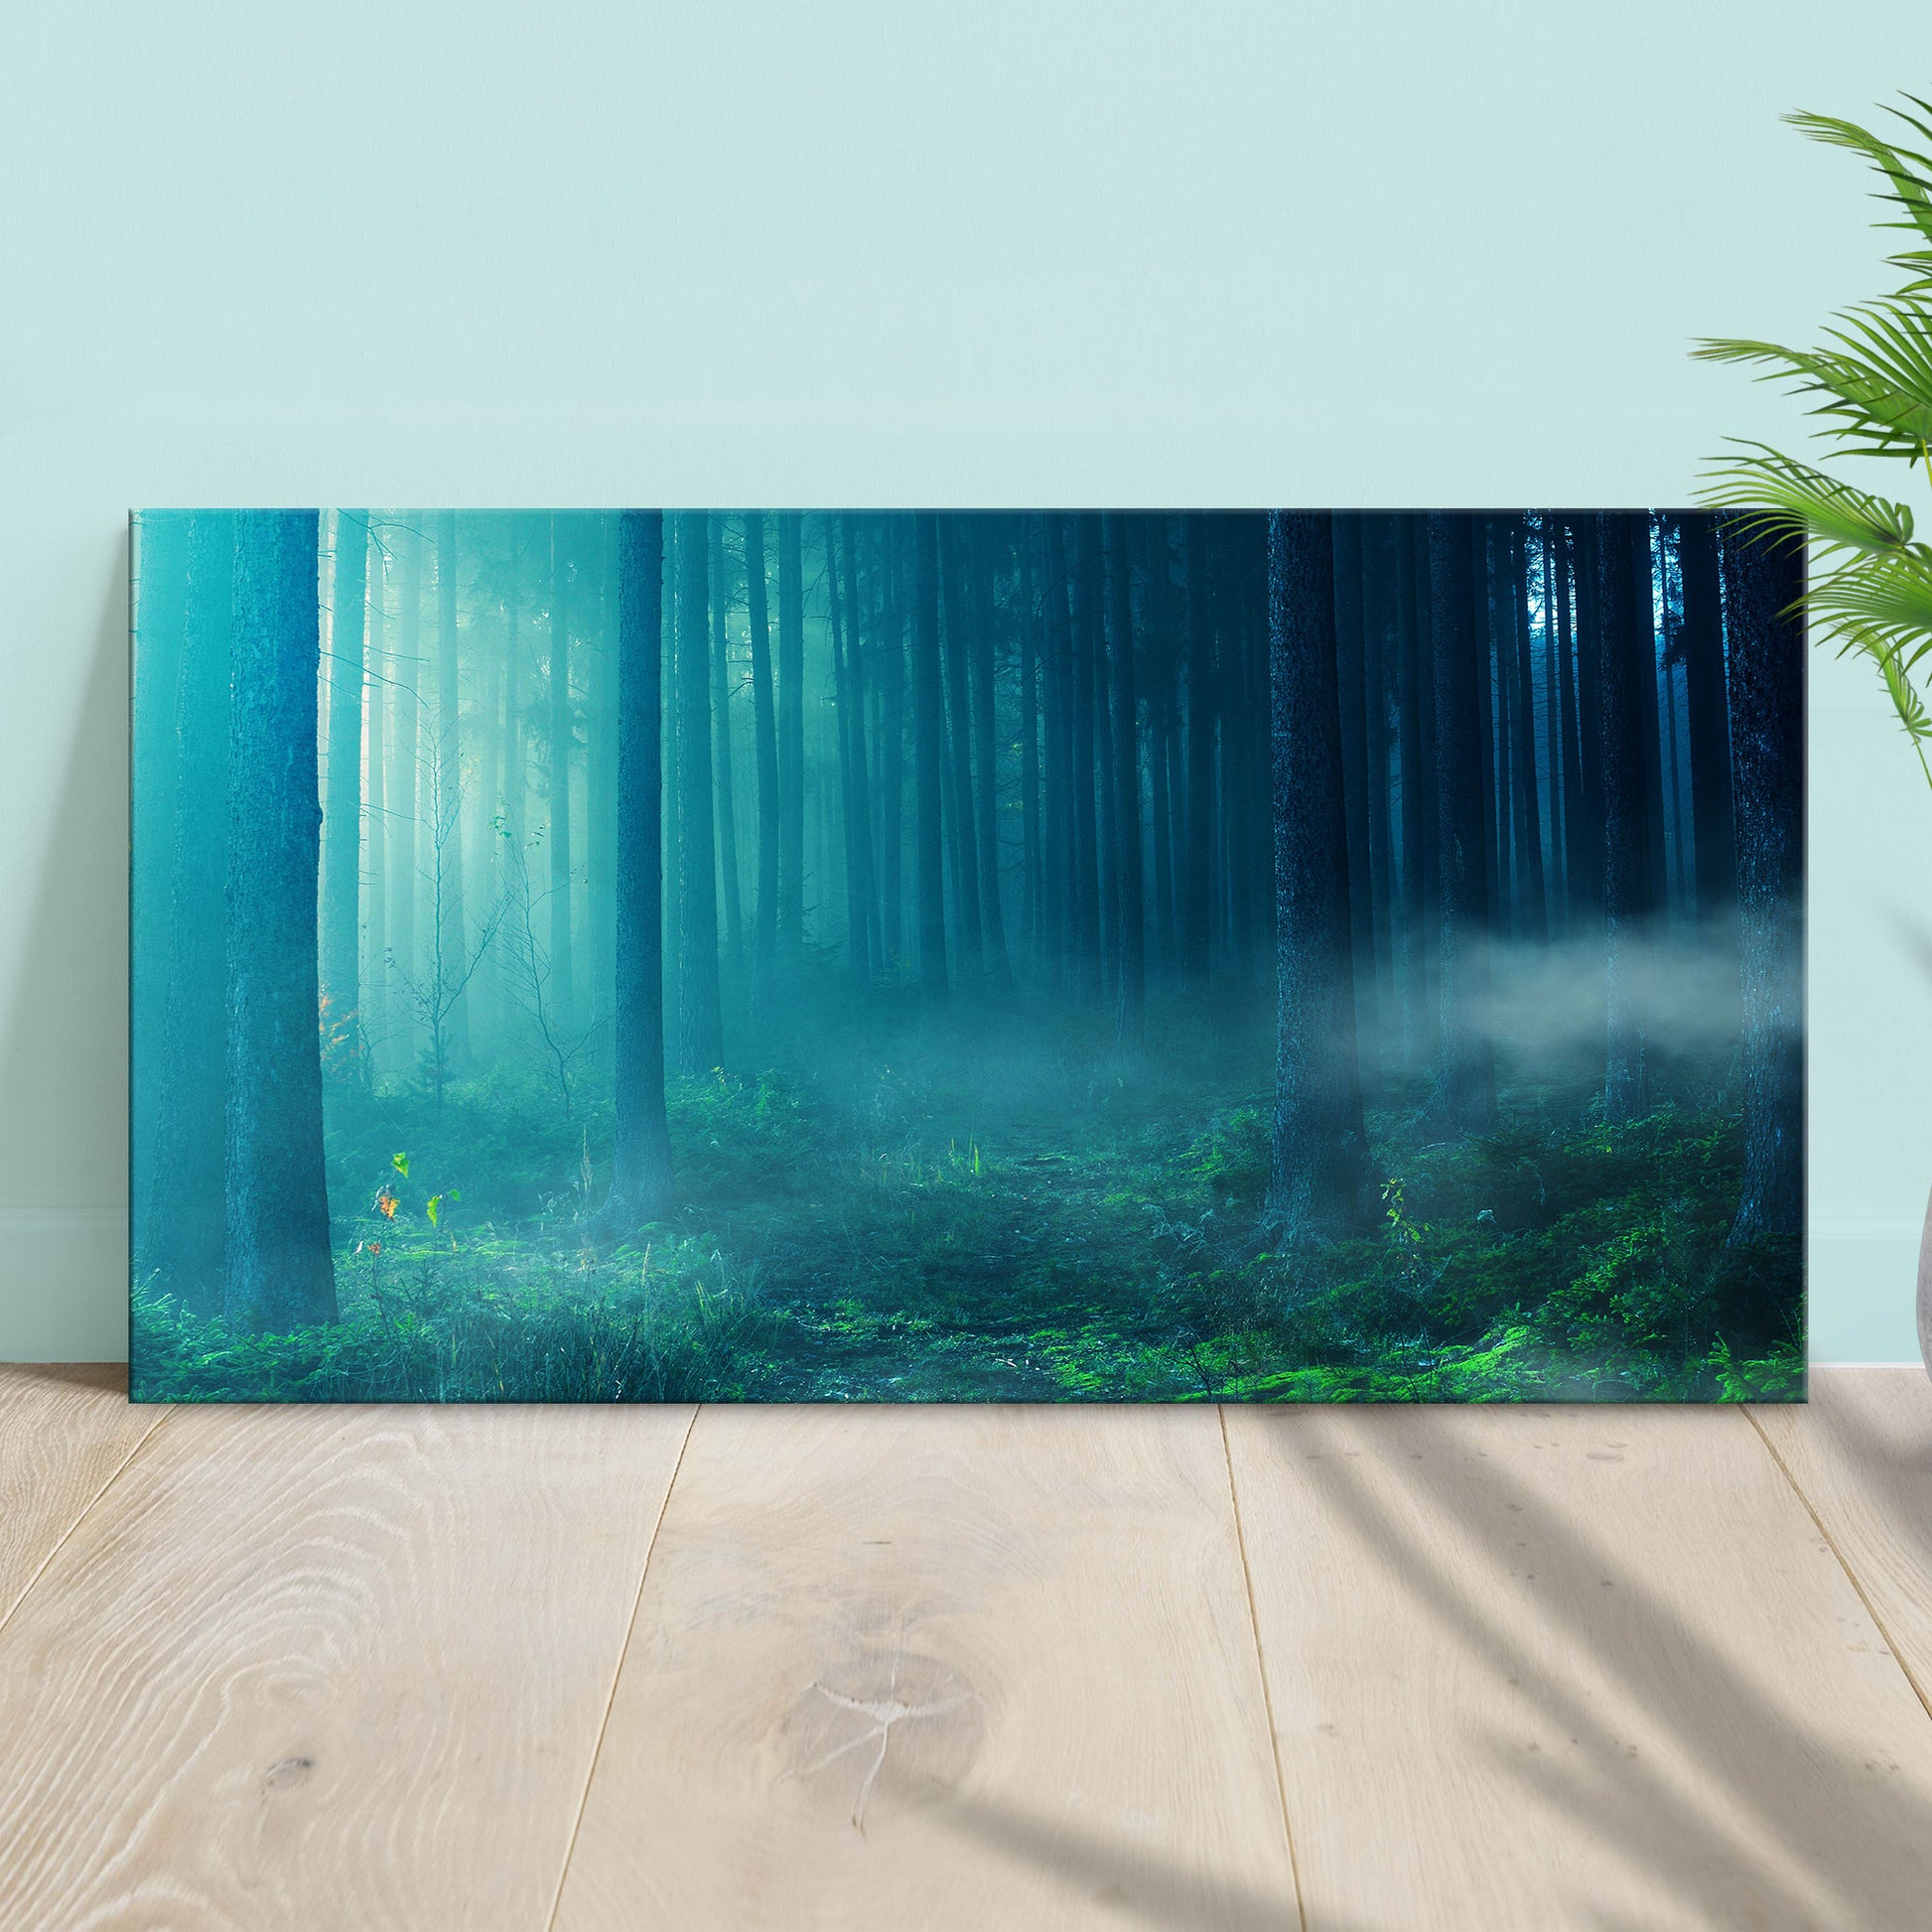 Into The Foggy Forest Canvas Wall Art - Image by Tailored Canvases